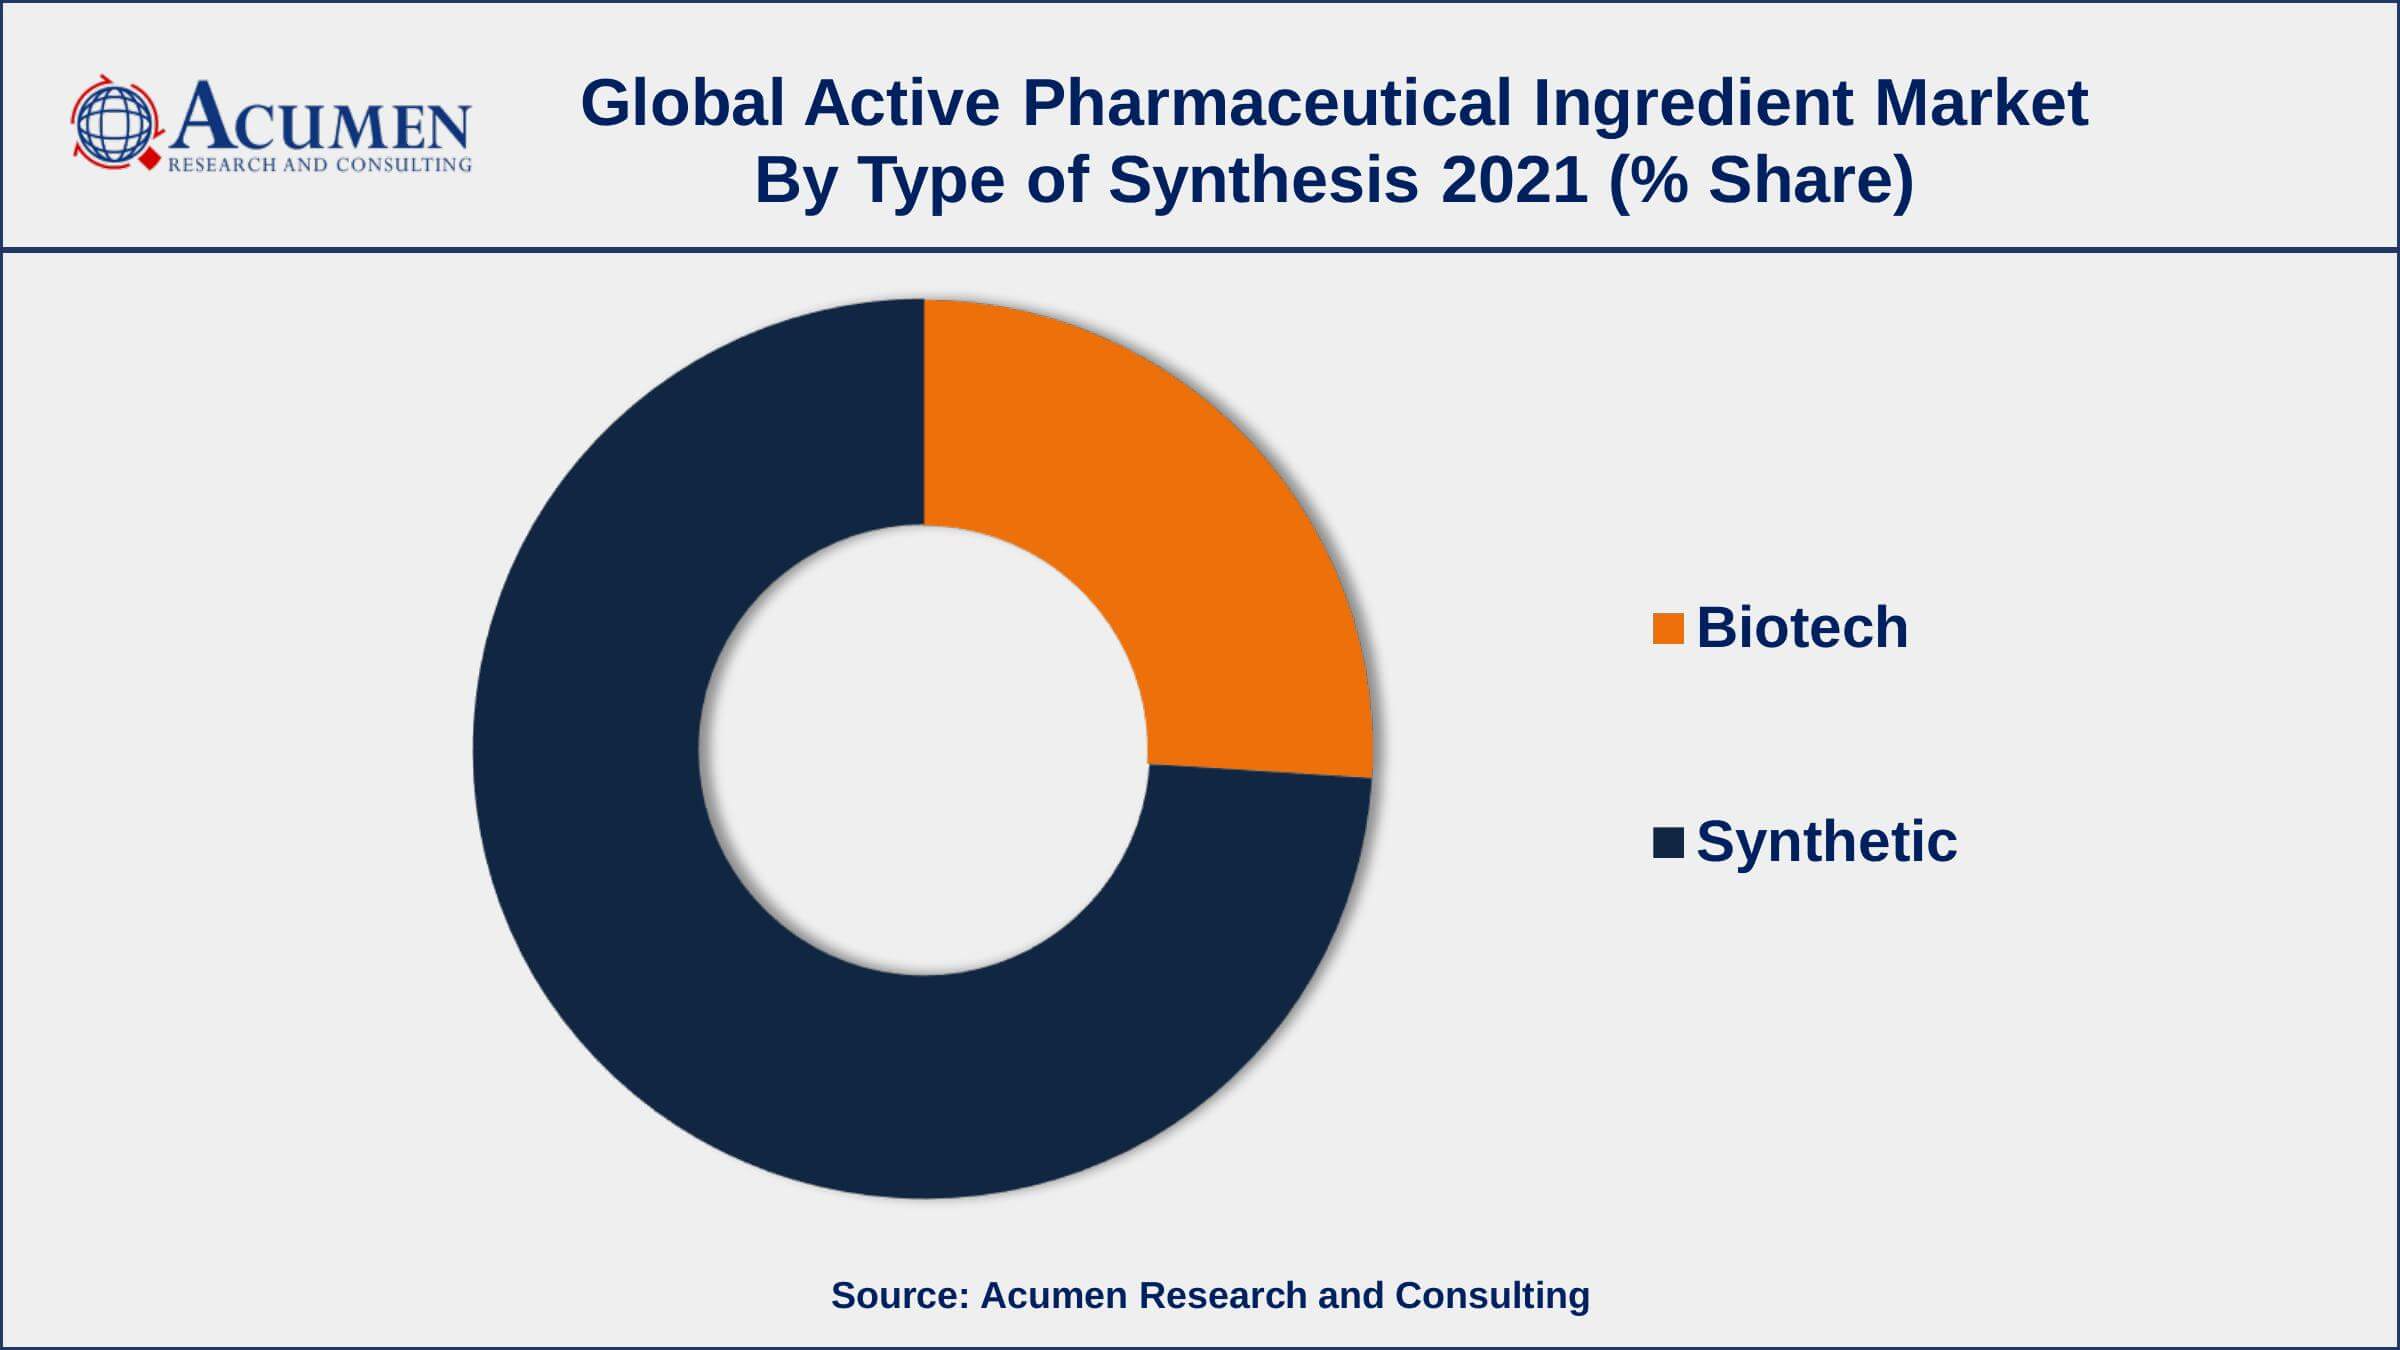 By type of synthesis, synthetic APIs segment generated about 74% market share in 2021